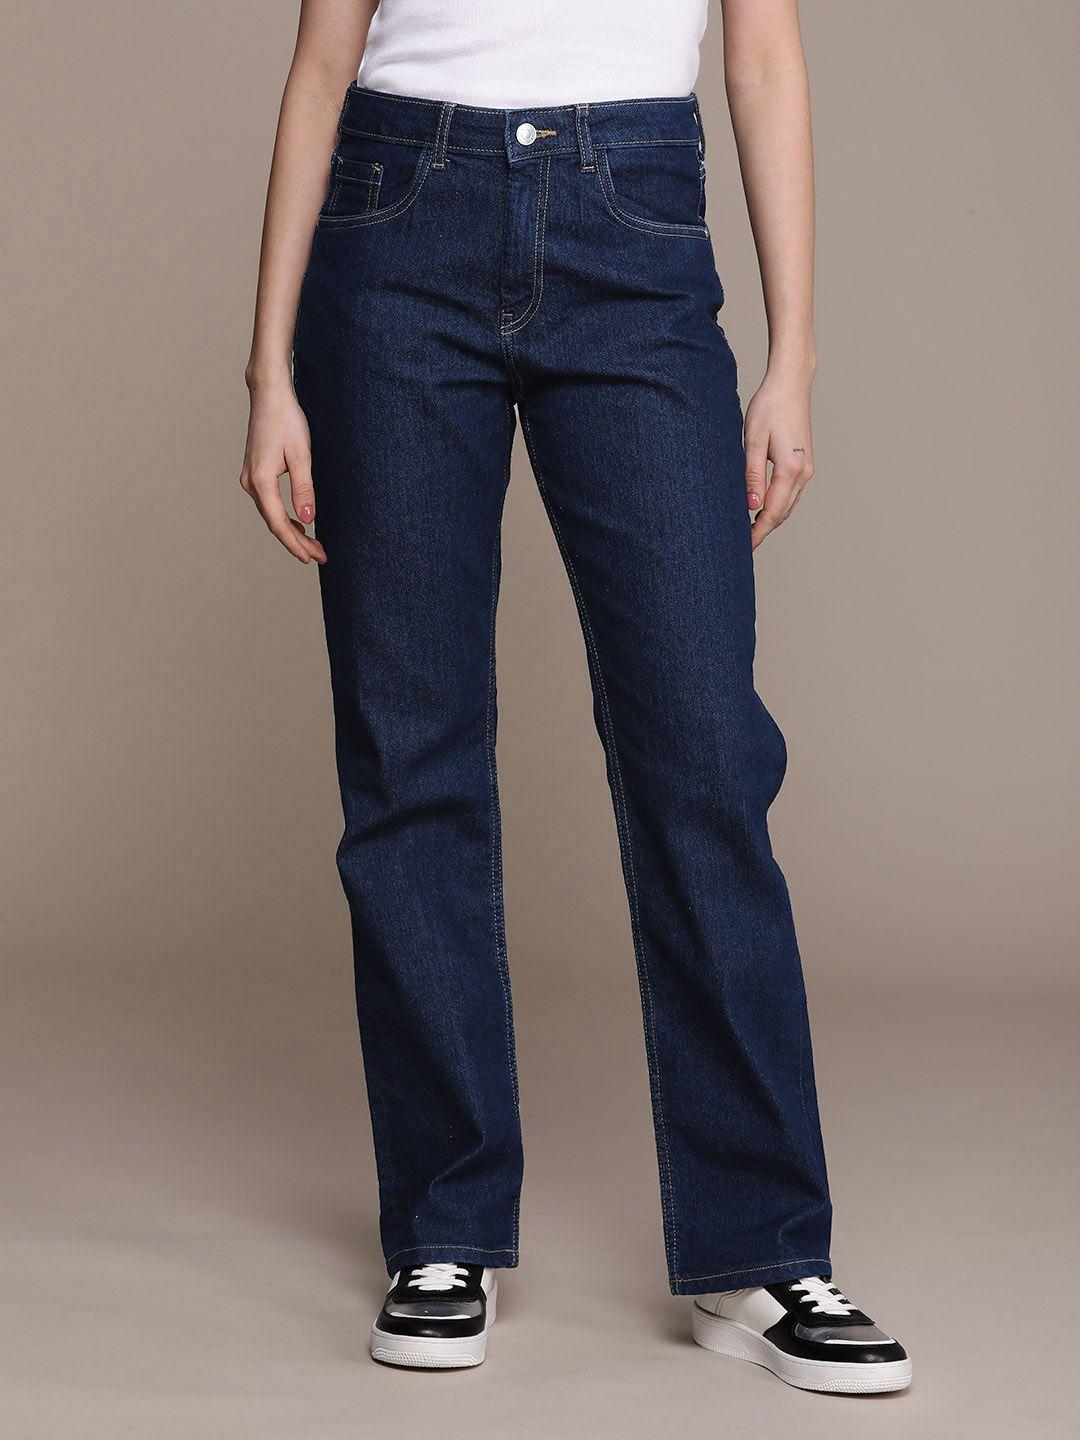 the-roadster-life-co.-women-straight-fit-stretchable-jeans